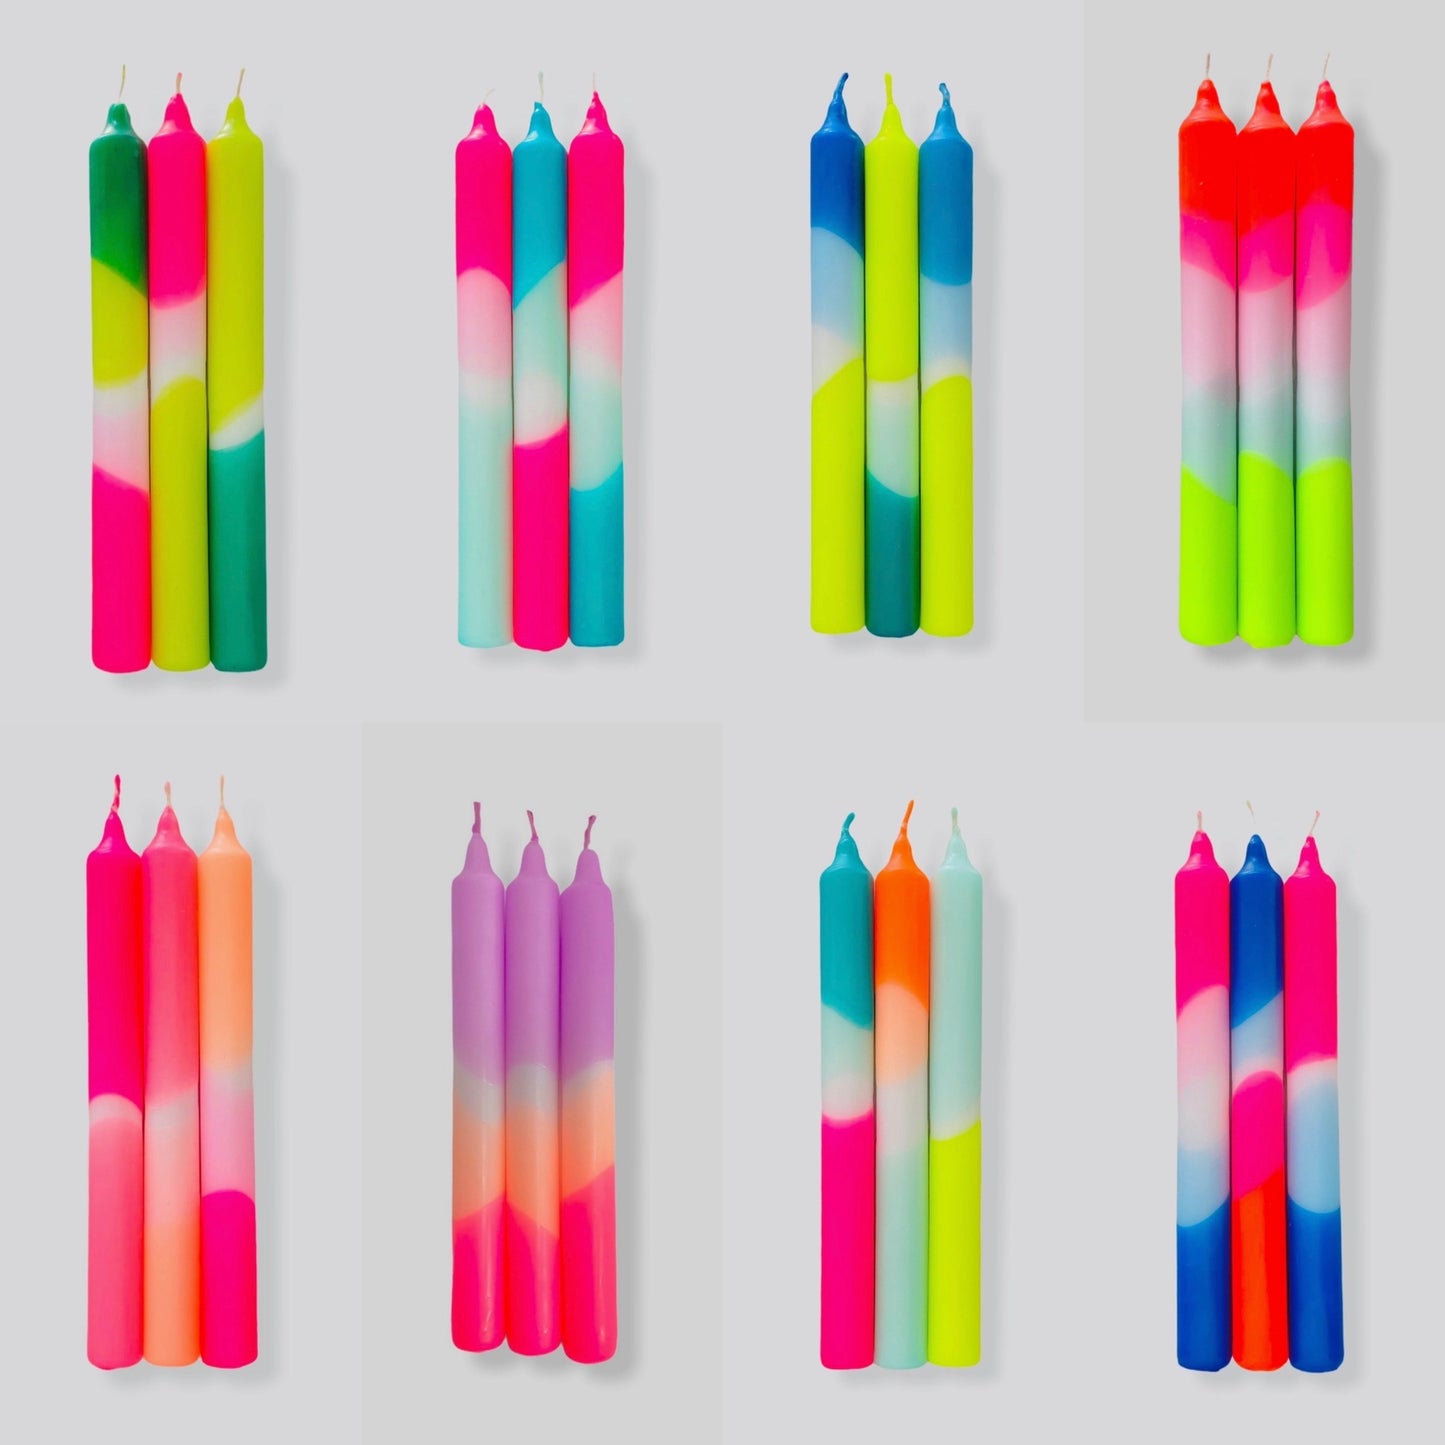 Neon dipped candles